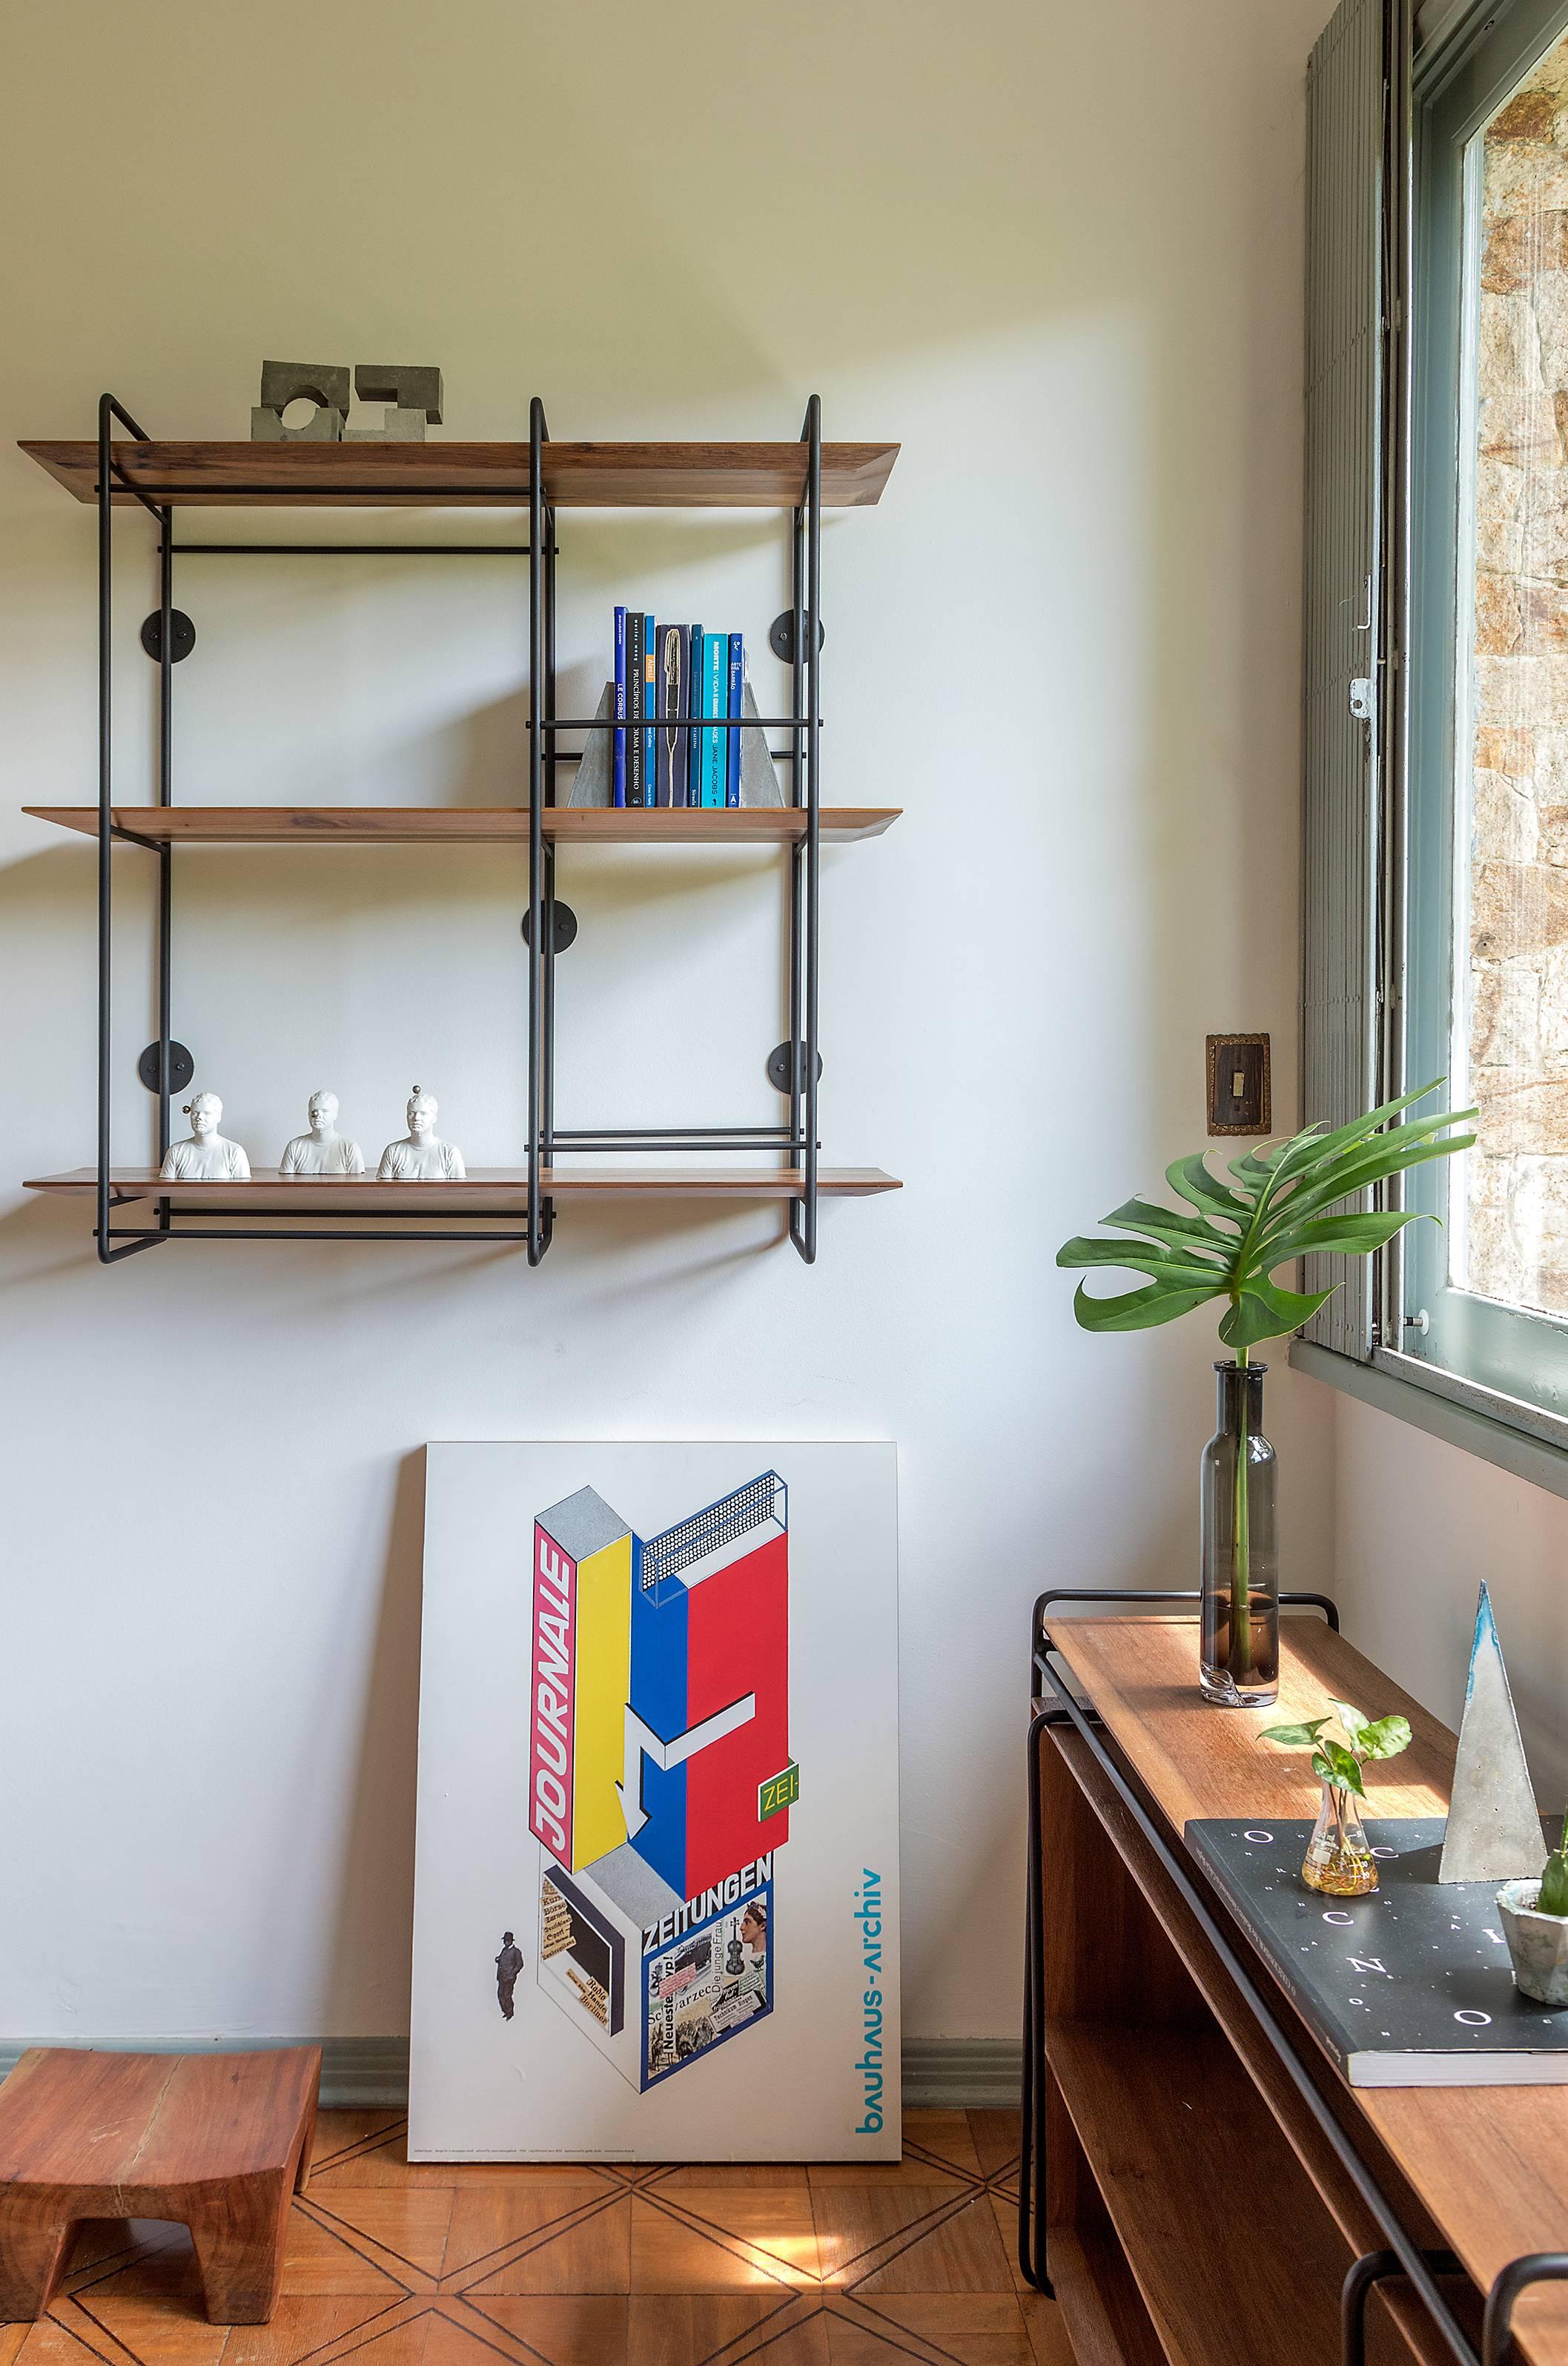 The Dots Shelving or floating shelf (2014) consist of rails and shelves that can be departed and easily transported. The shelves made in solid wood have features on its bottom that fit in the iron providing visual lightness and strengthen the